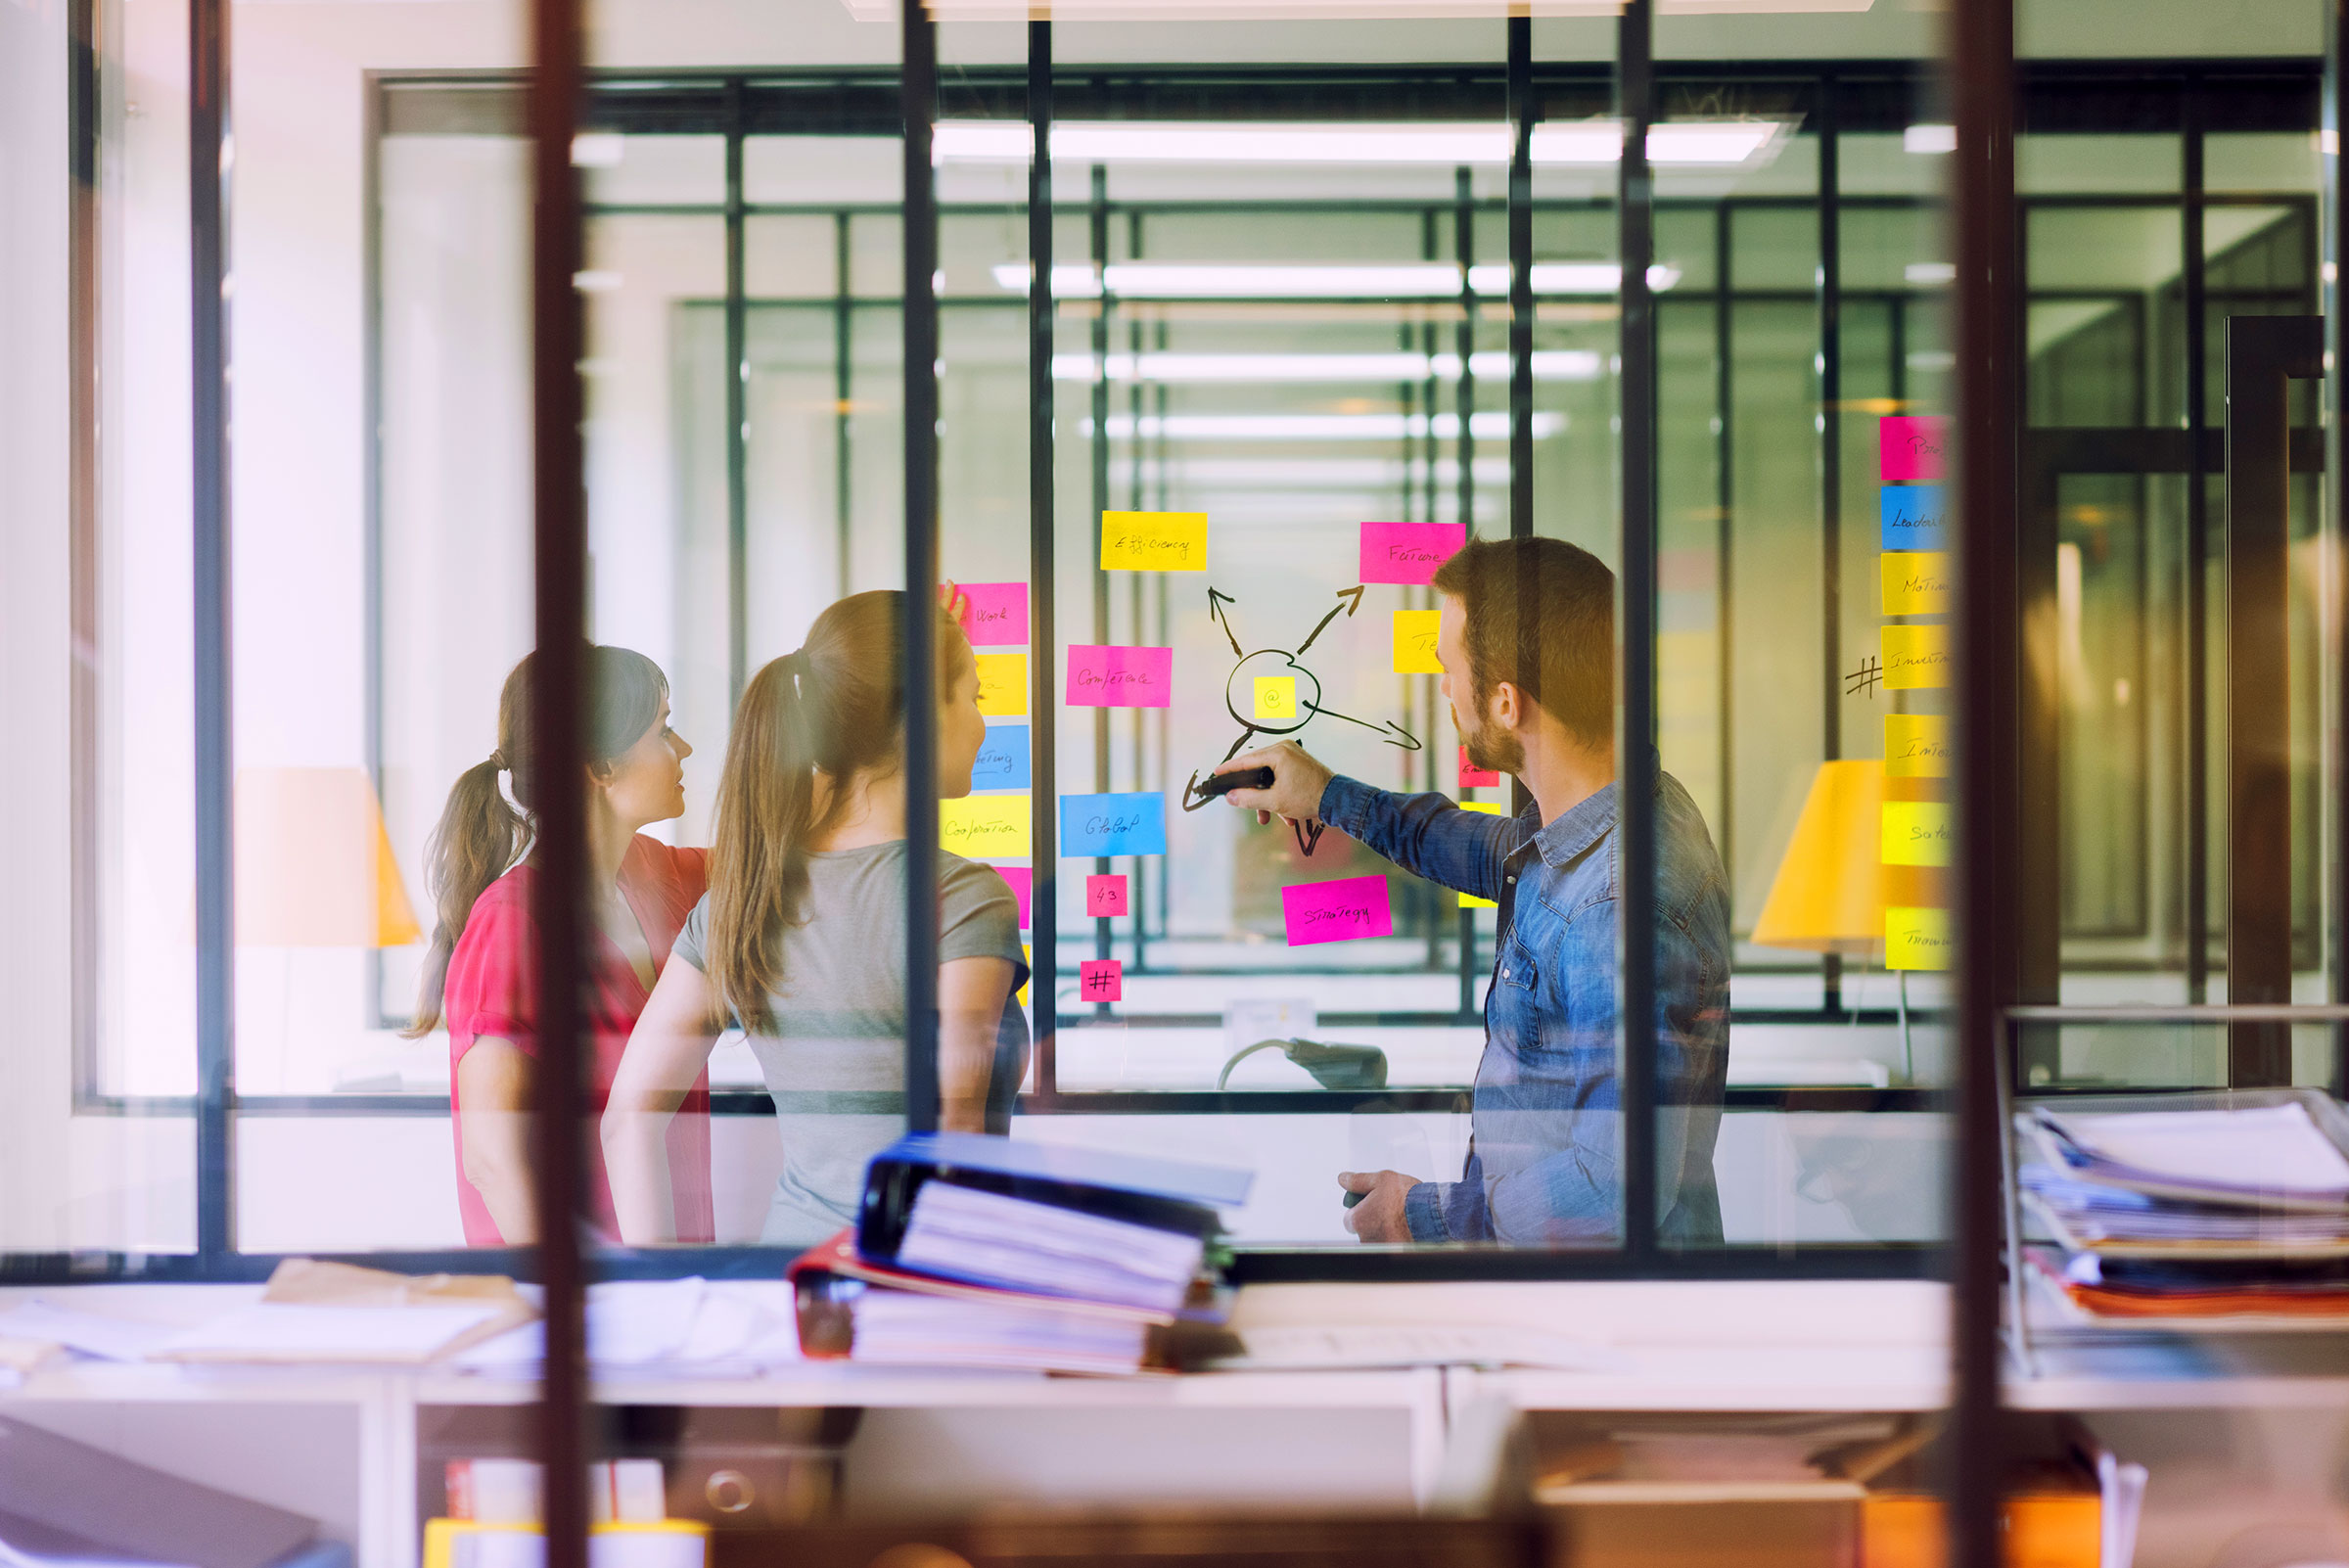 Group-of-business-people-working-in-front-of-glass-wall-with-post-notes